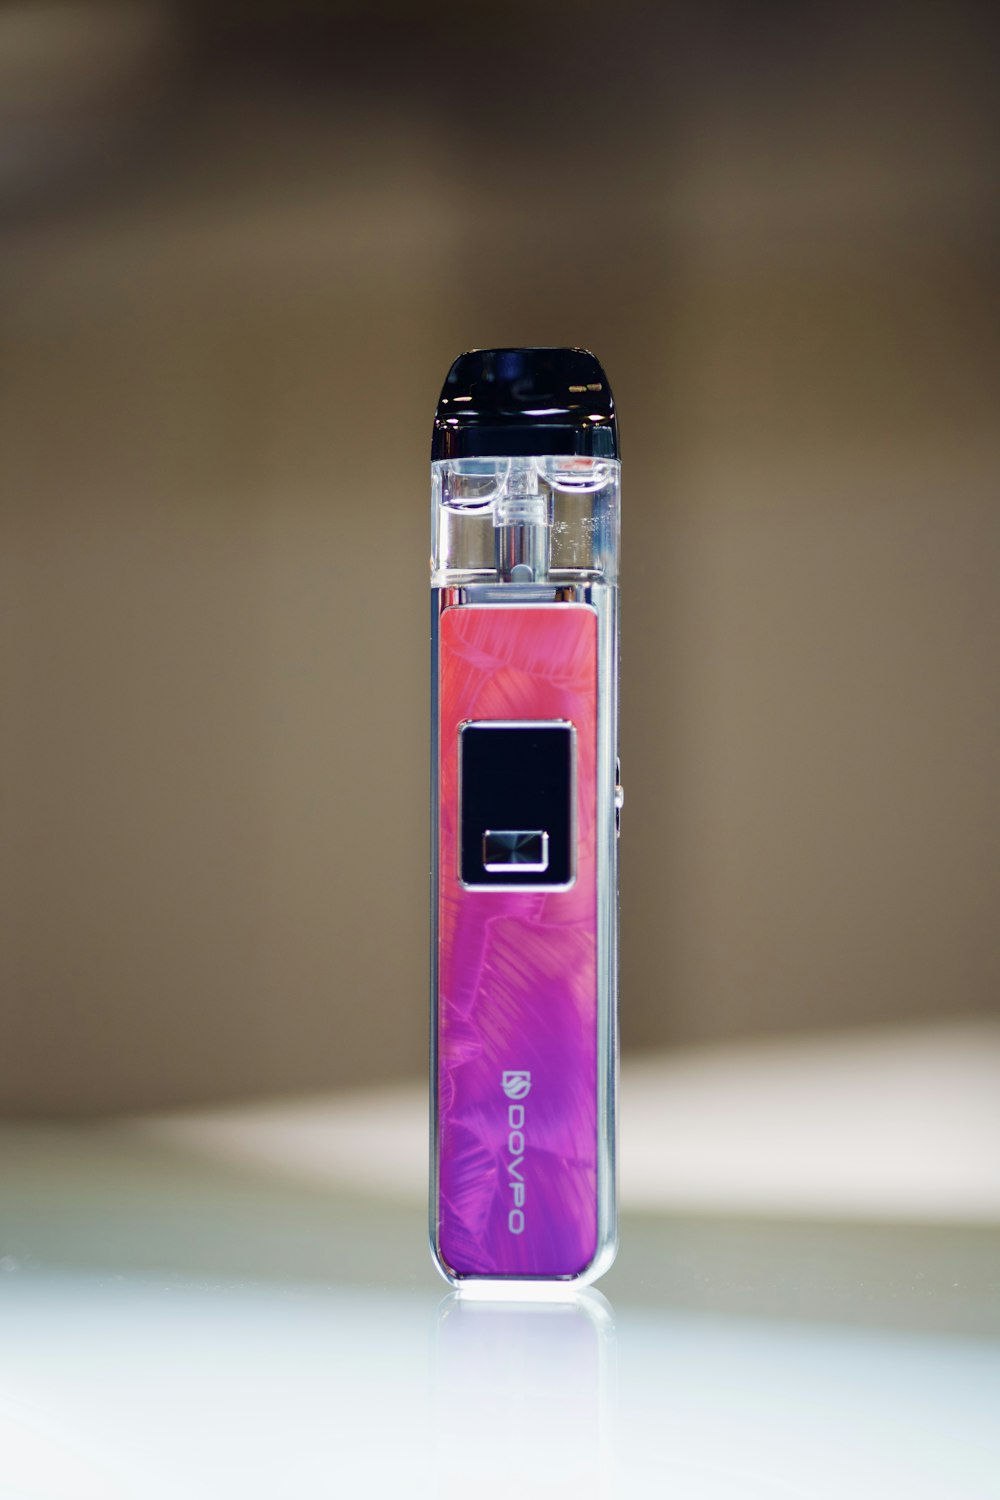 a purple and pink electronic device sitting on a table